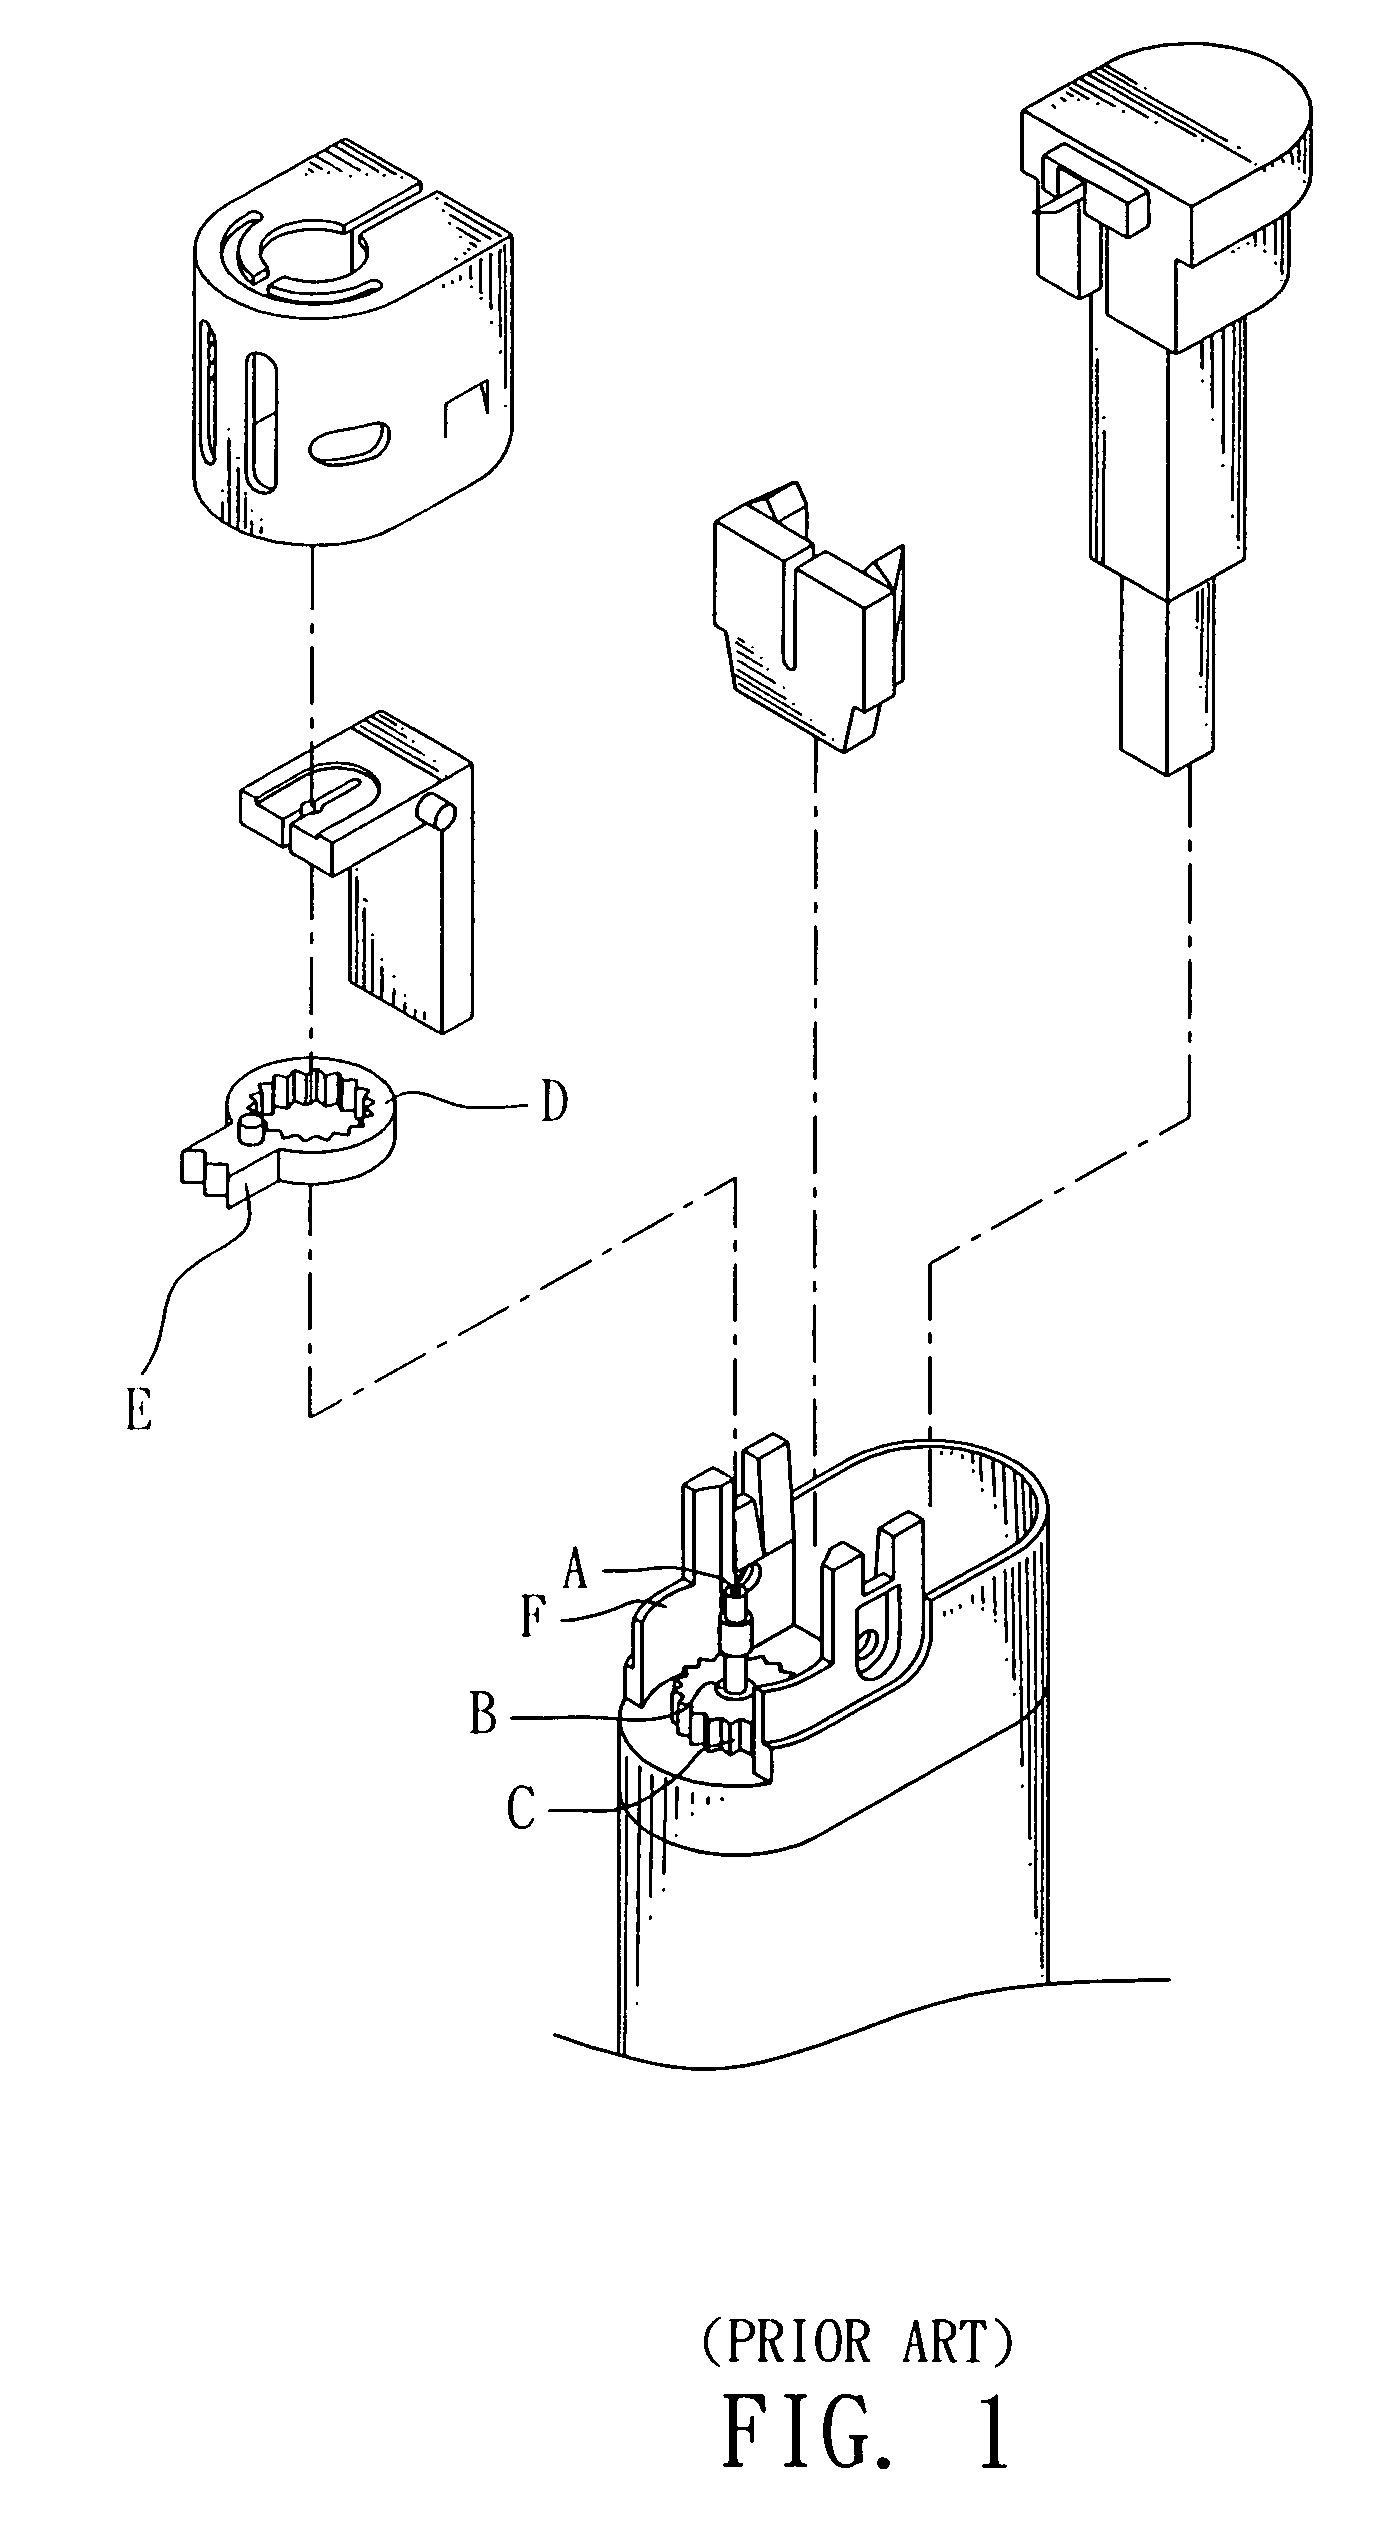 Gas flowrate control device for gas burner